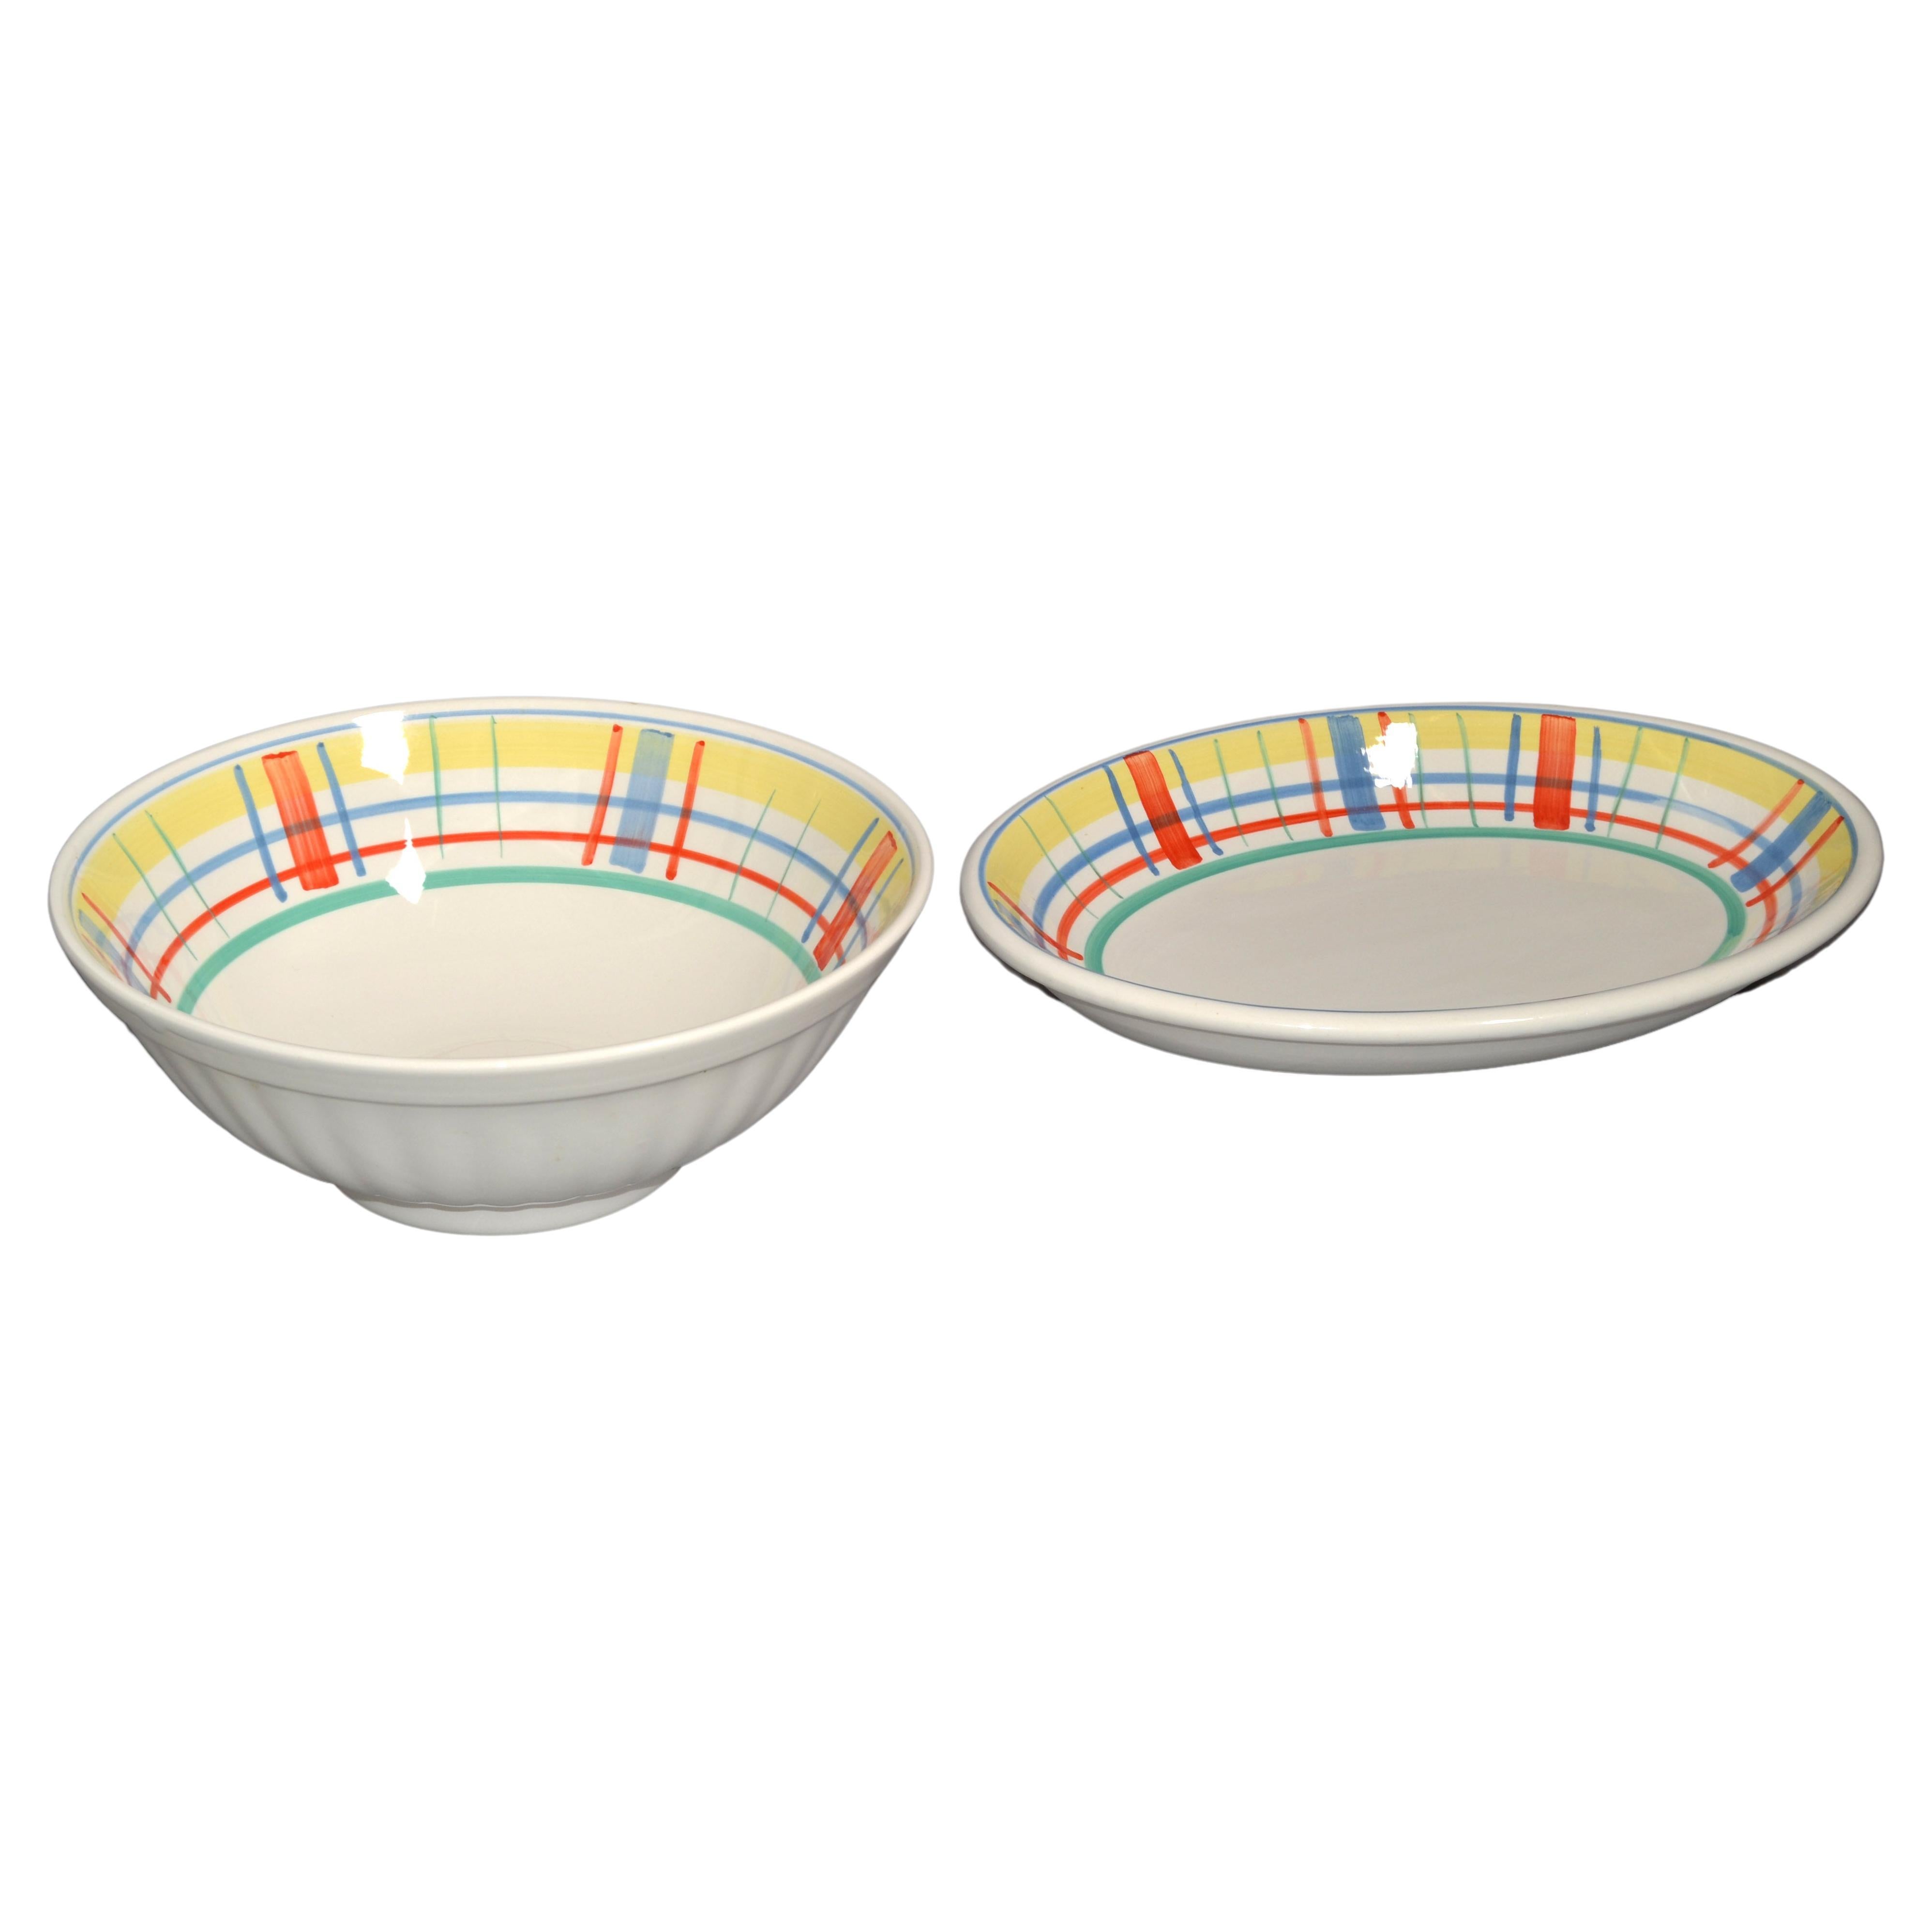 Charming Set of 2 Serveware from Italy made in Ceramic and hand-painted in bright yellow, red, blue and green colors.
The Set consisting out of a round 12.38 inches diameter Serving Bowl and a matching oval Meat or Vegetable Platter.
Both are